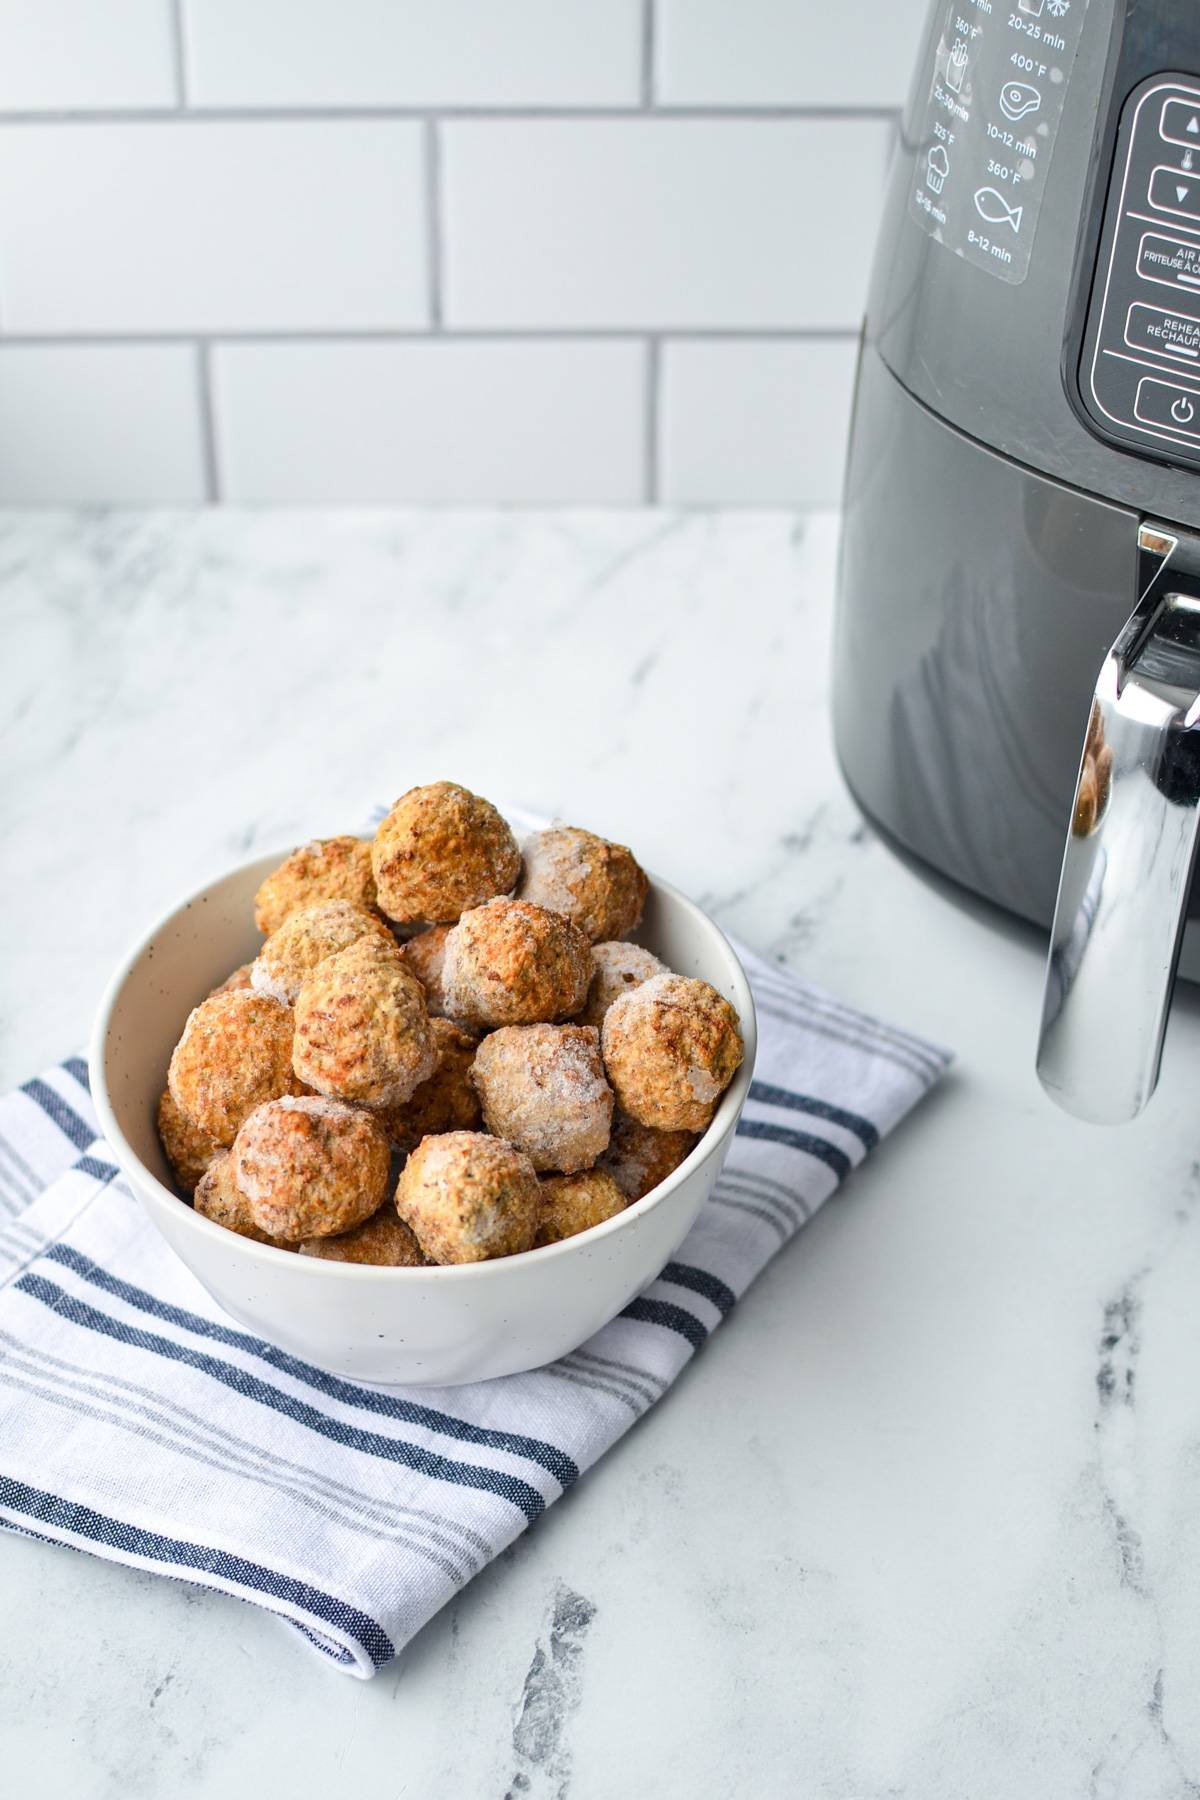 A bowl of frozen meatballs on a white and blue napkin, with an air fryer just out of view.